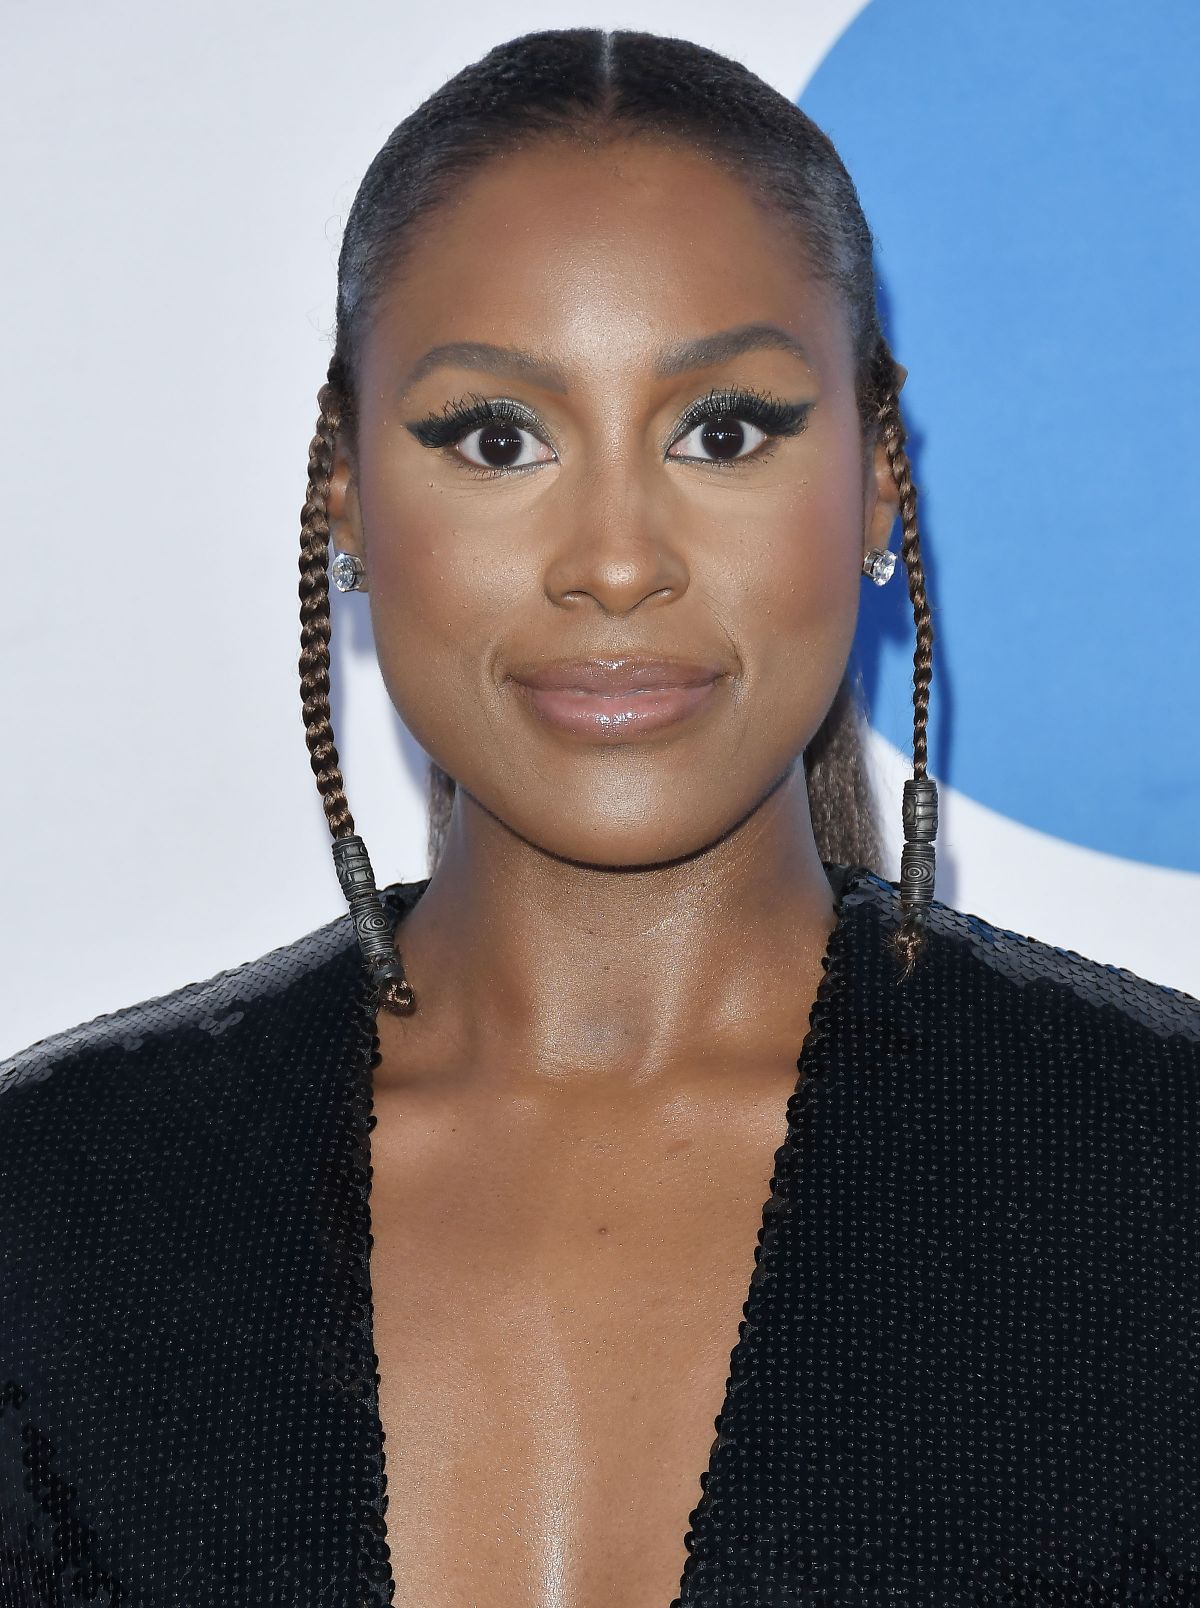 ISSA RAE at Little Premiere in Westwood 04/08/2019 – HawtCelebs